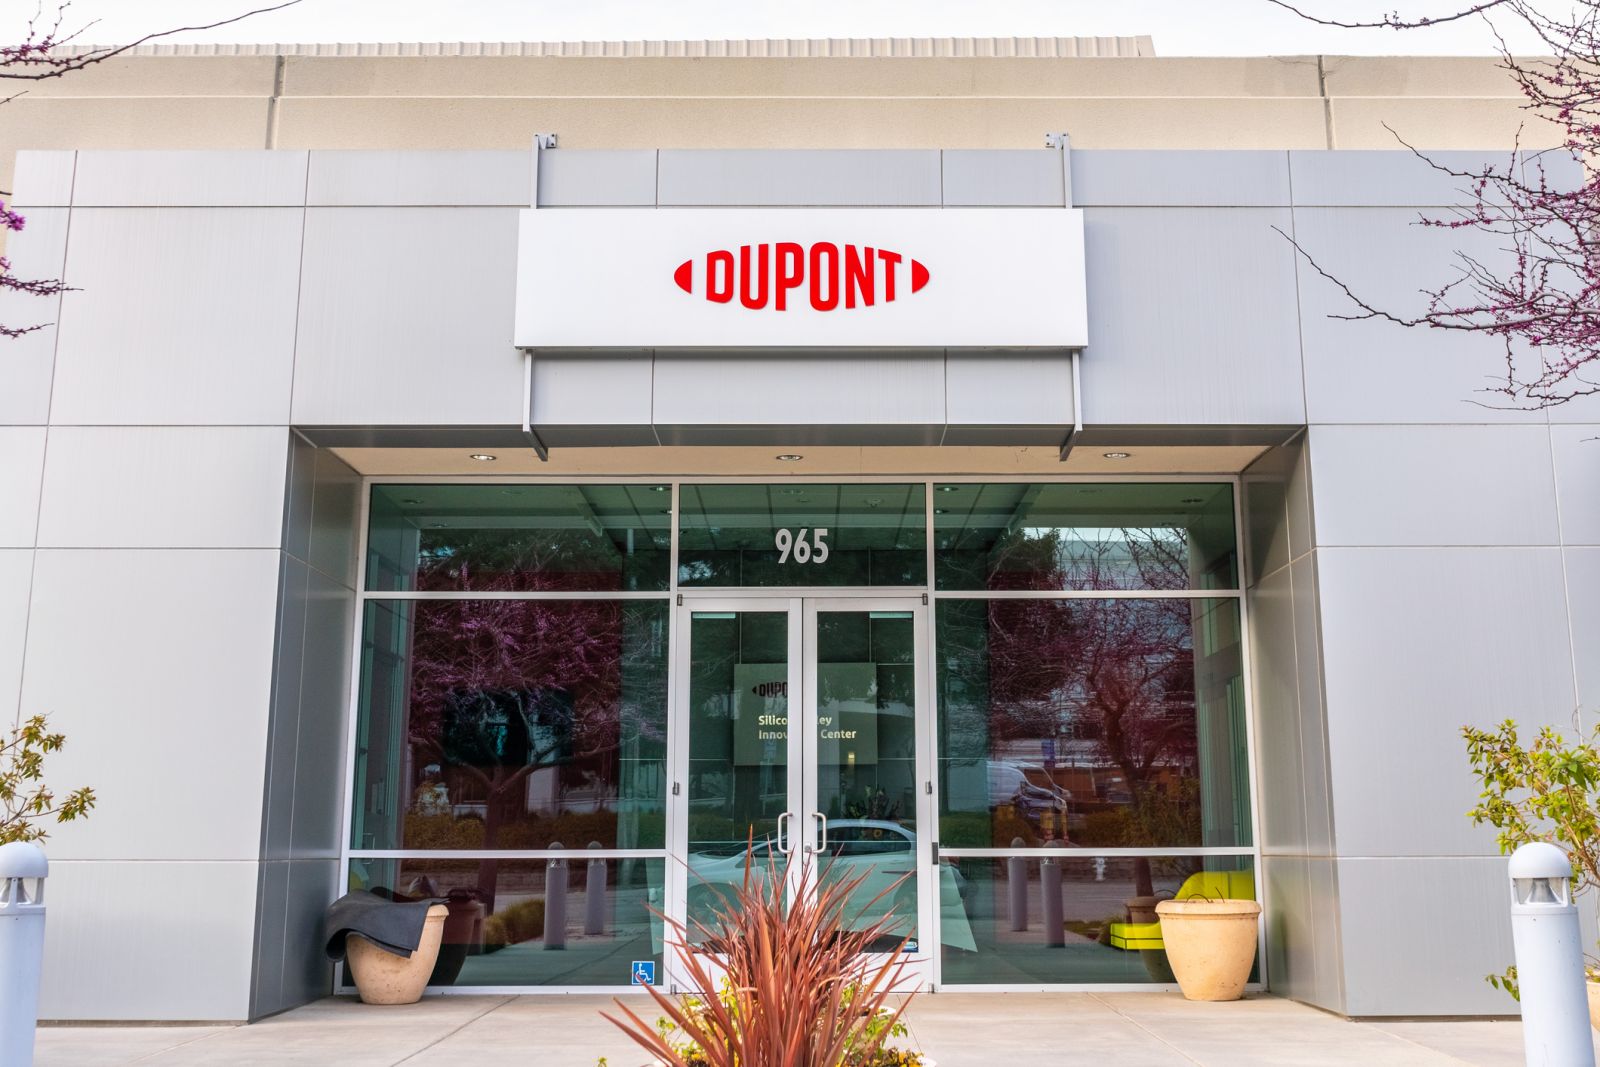 Basic Materials - DuPont de Nemours Inc store front - by Sundry Photography via iStock